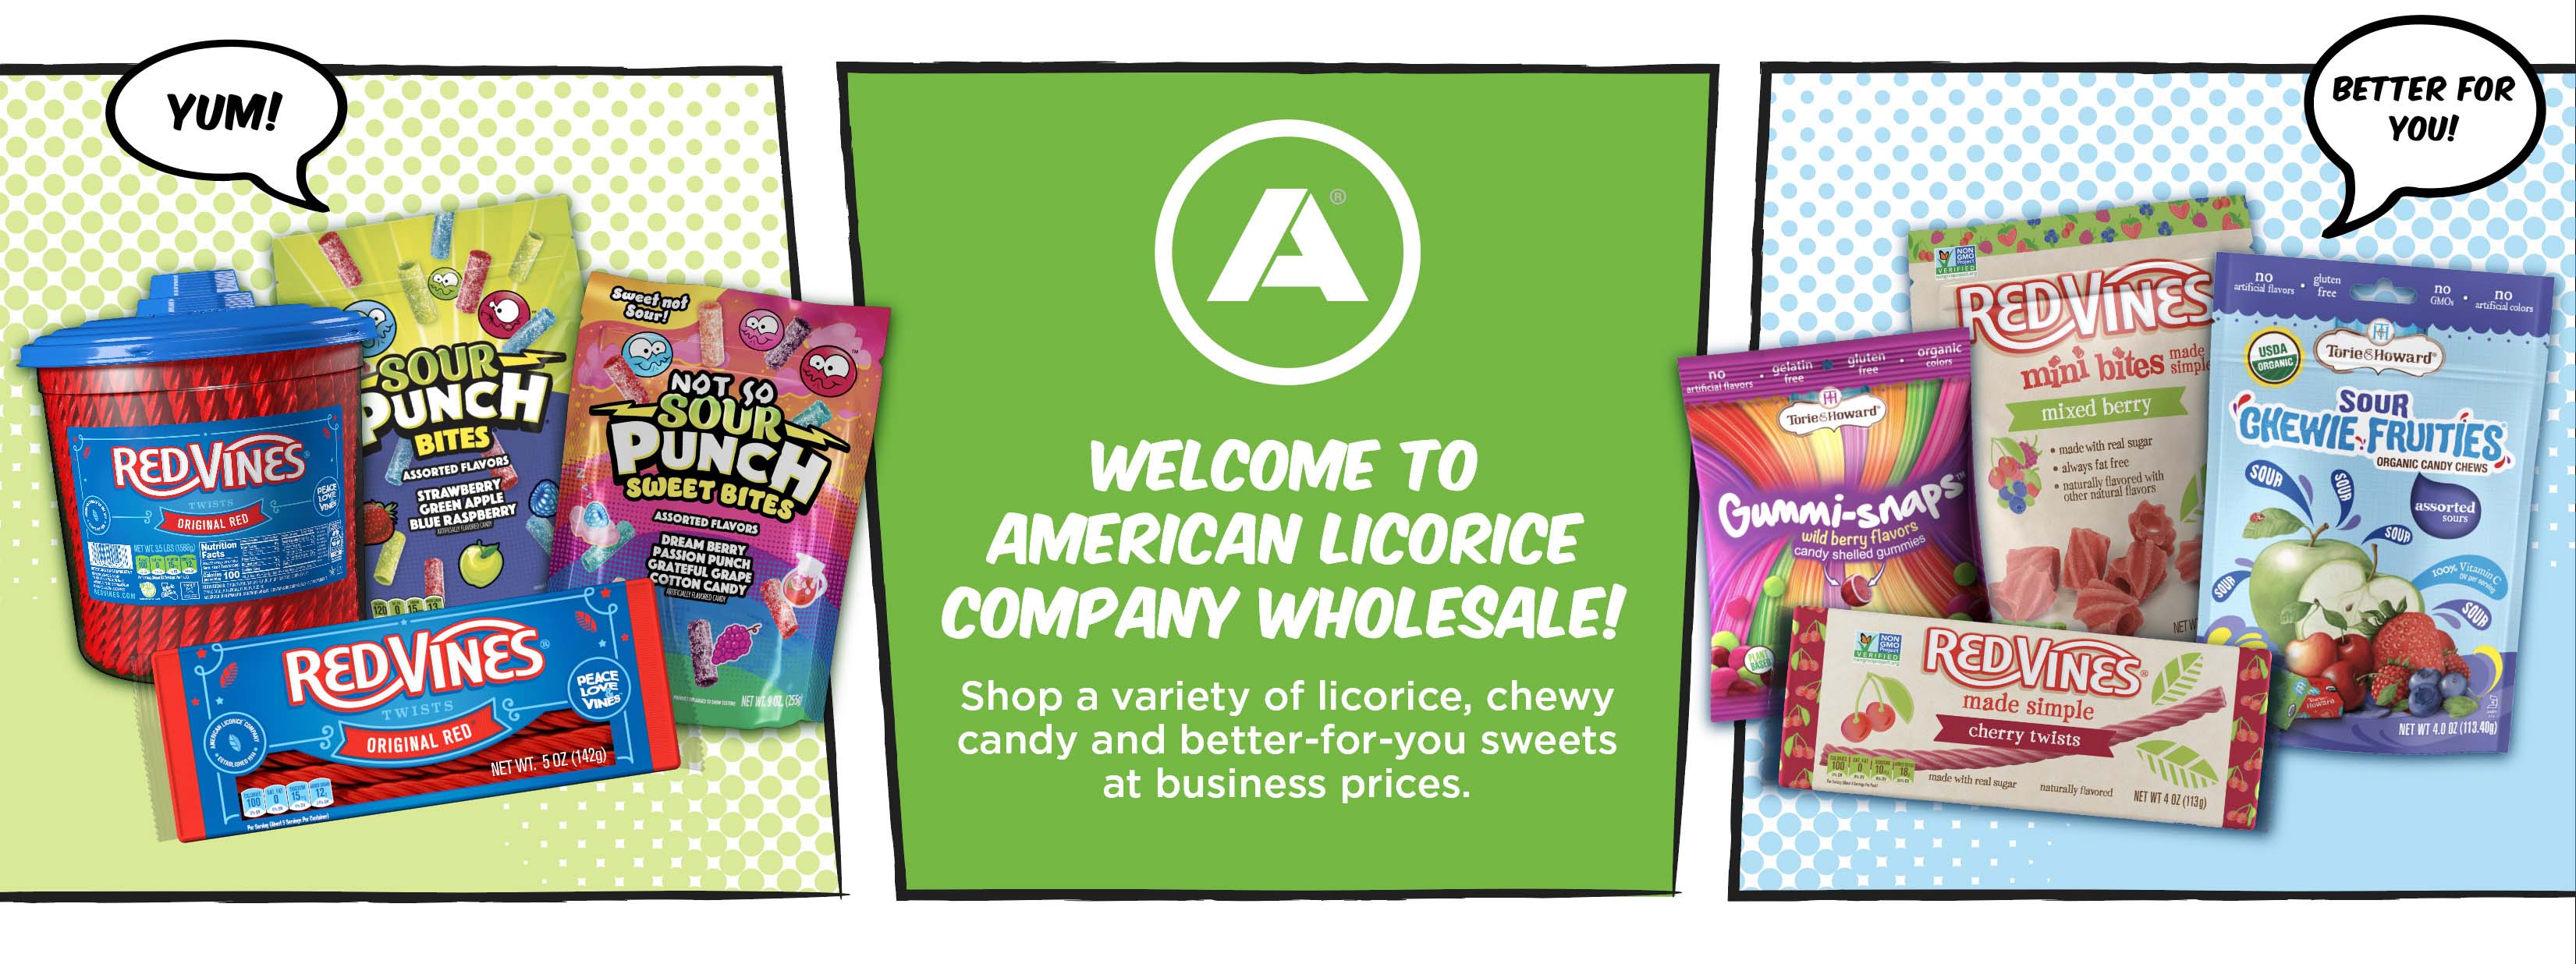 Welcome to American Licorice Company Wholesale! Shop a variety of licorice, chewy candy, and better-for-you sweets at business prices